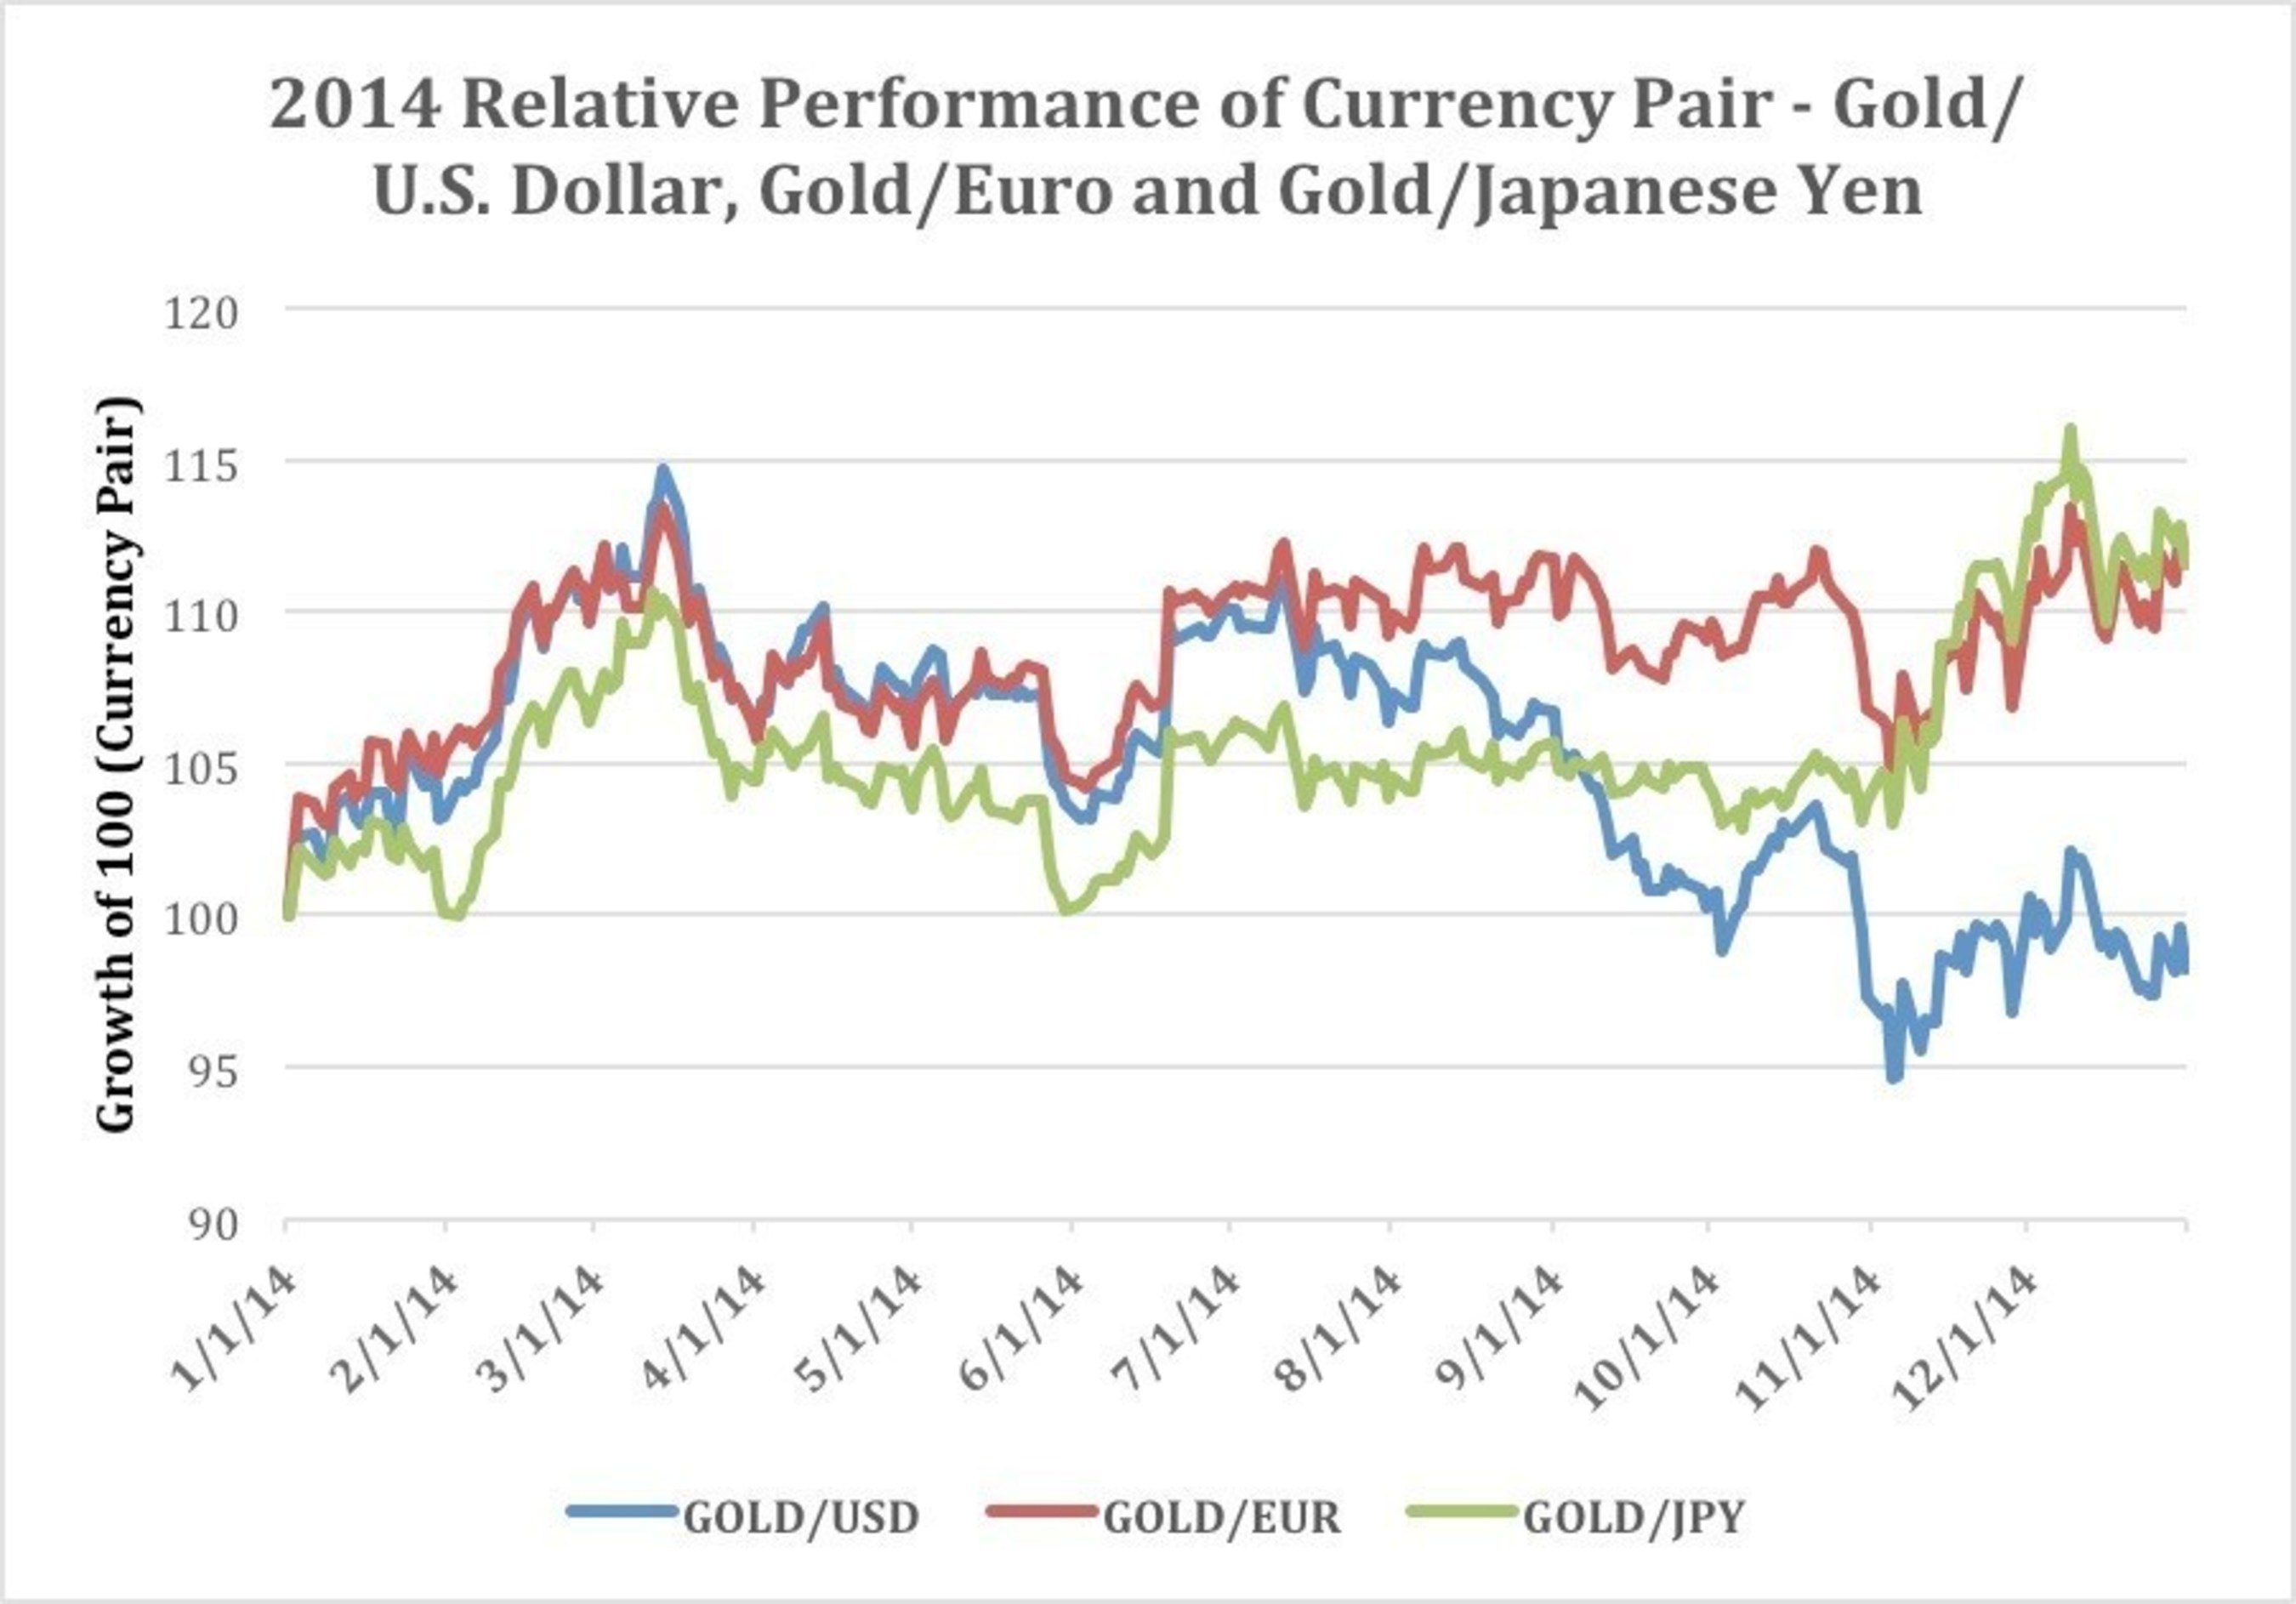 2014 Relative Performance of Currency Pair - Gold/U.S. Dollar, Gold/Euro and Gold/Japanese Yen